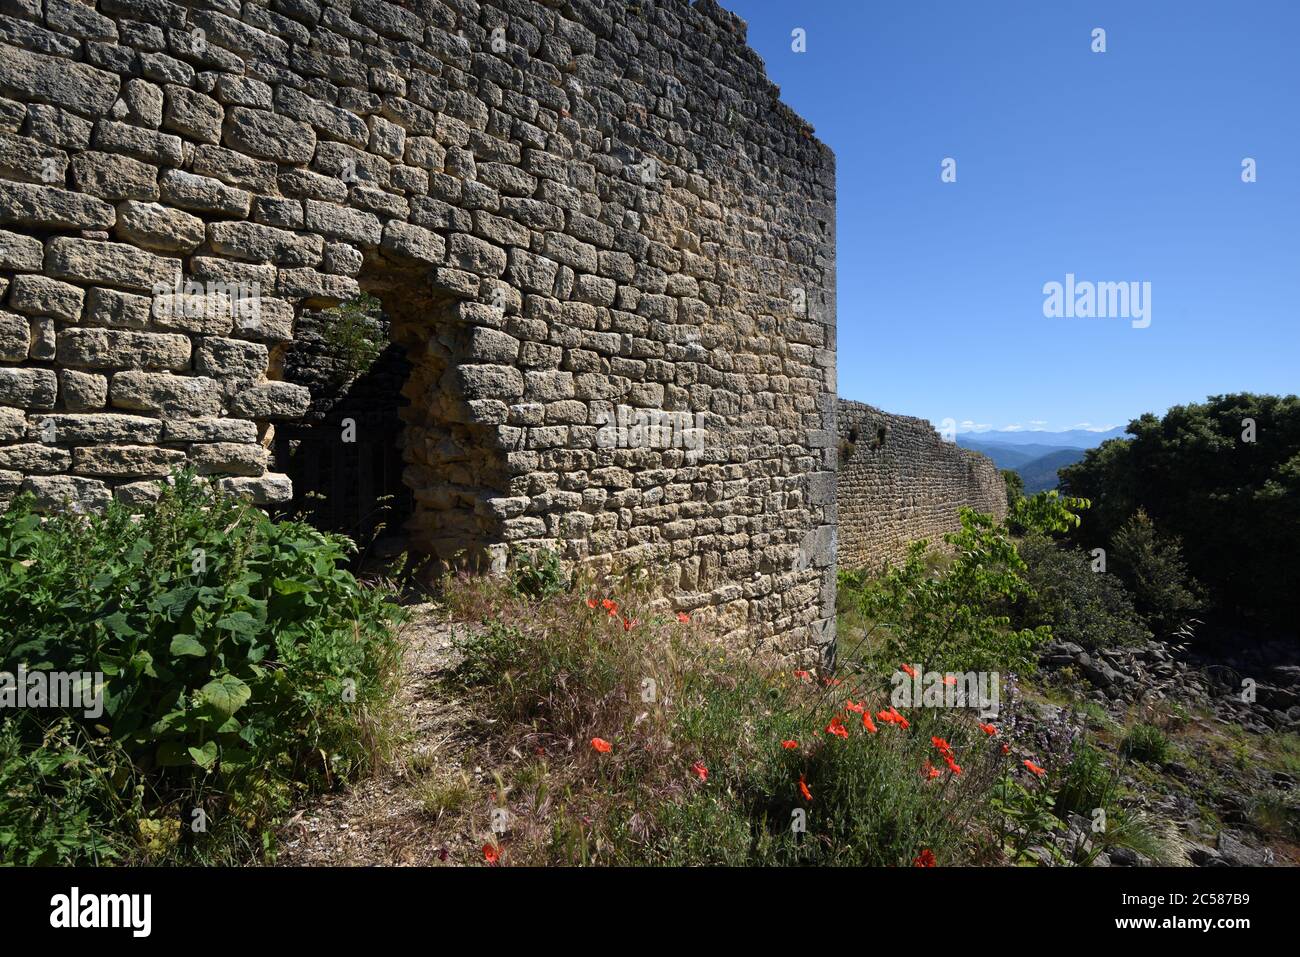 Defensive Wall of Fortified Ruined & Abandoned Village, Prehistoric Village or Oppidum on the Ganagobie Plateau Provence France Stock Photo